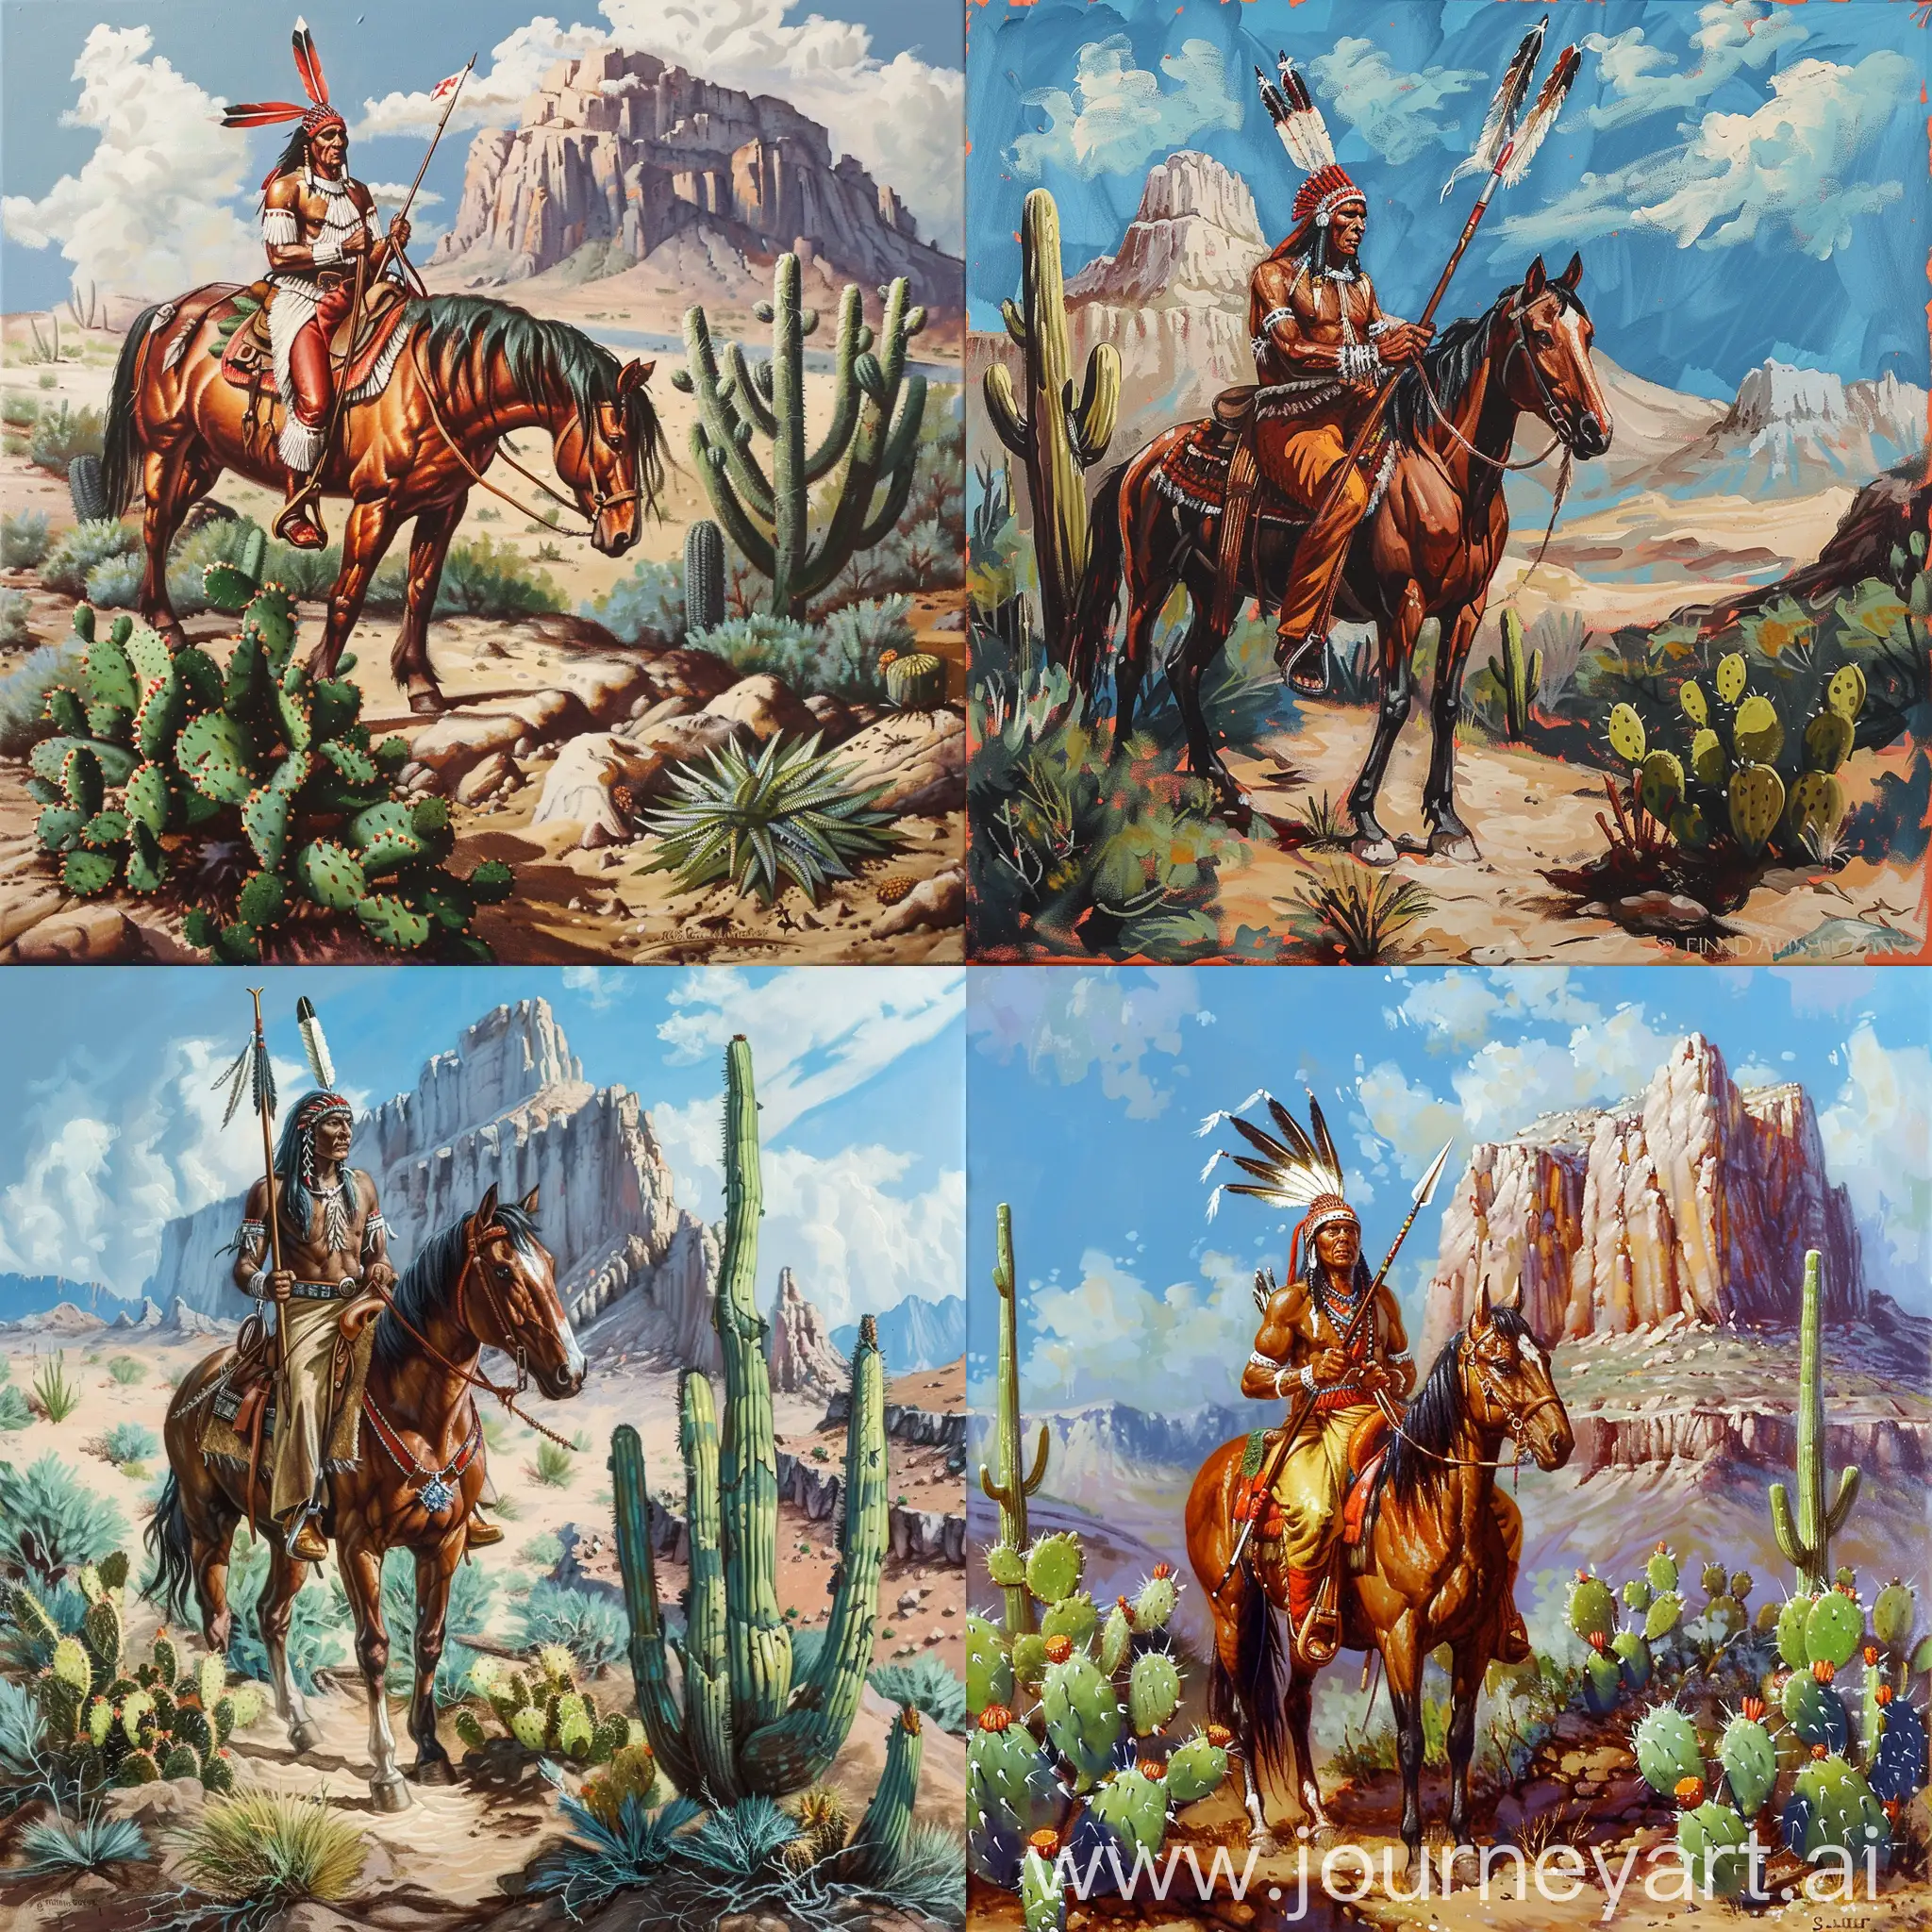 Indian-Warrior-Riding-Horse-with-Lance-in-Desert-Landscape